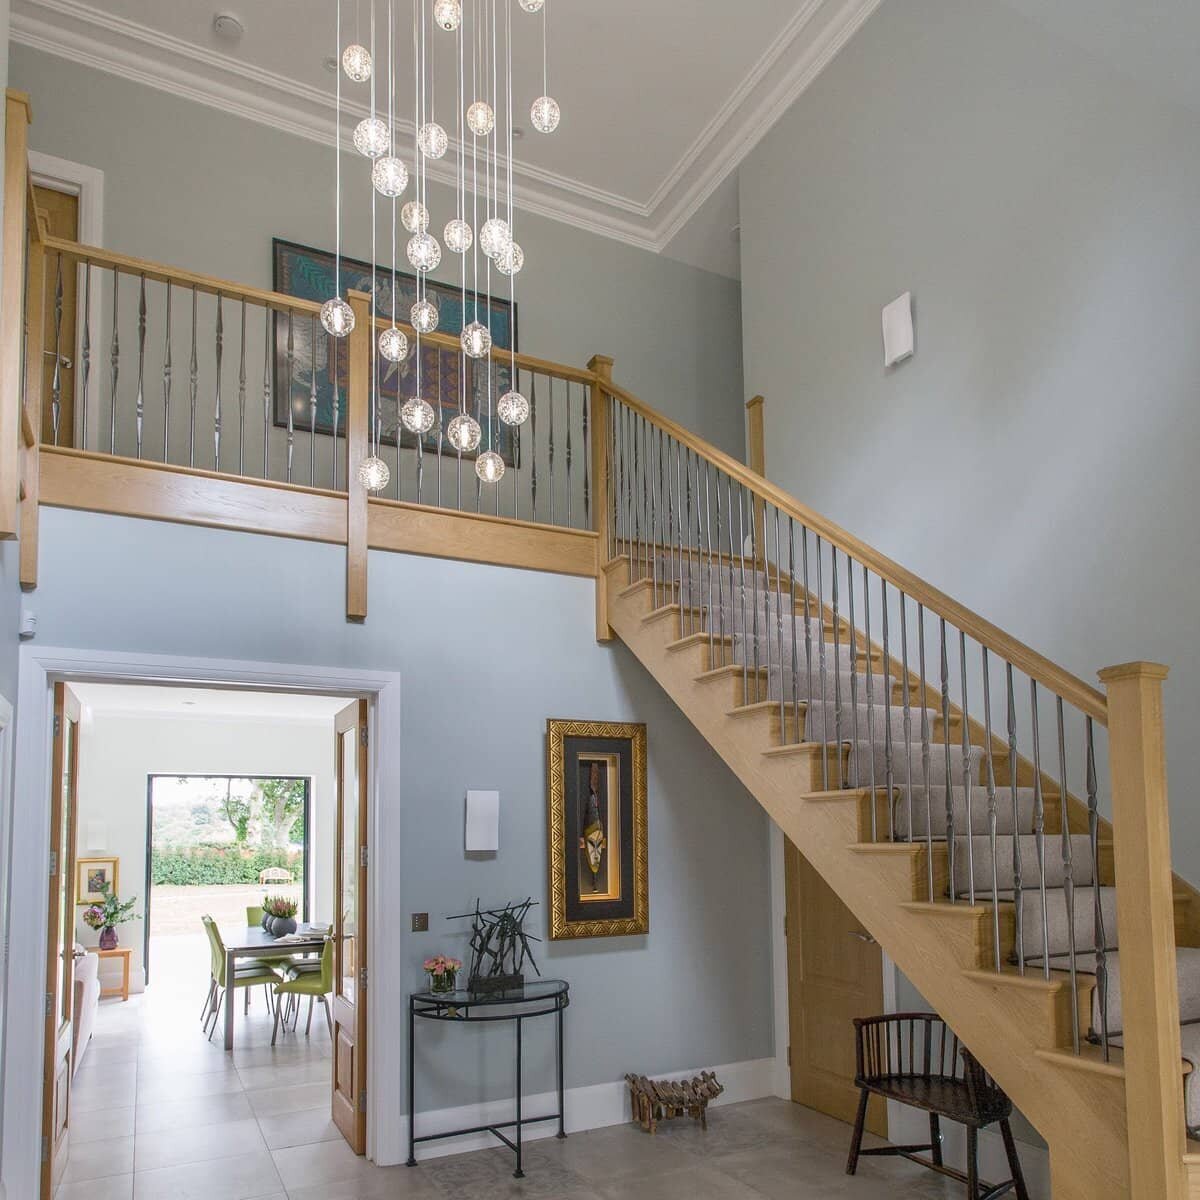 Pendant staircase lighitng - Image: Tricia Carroll Designs